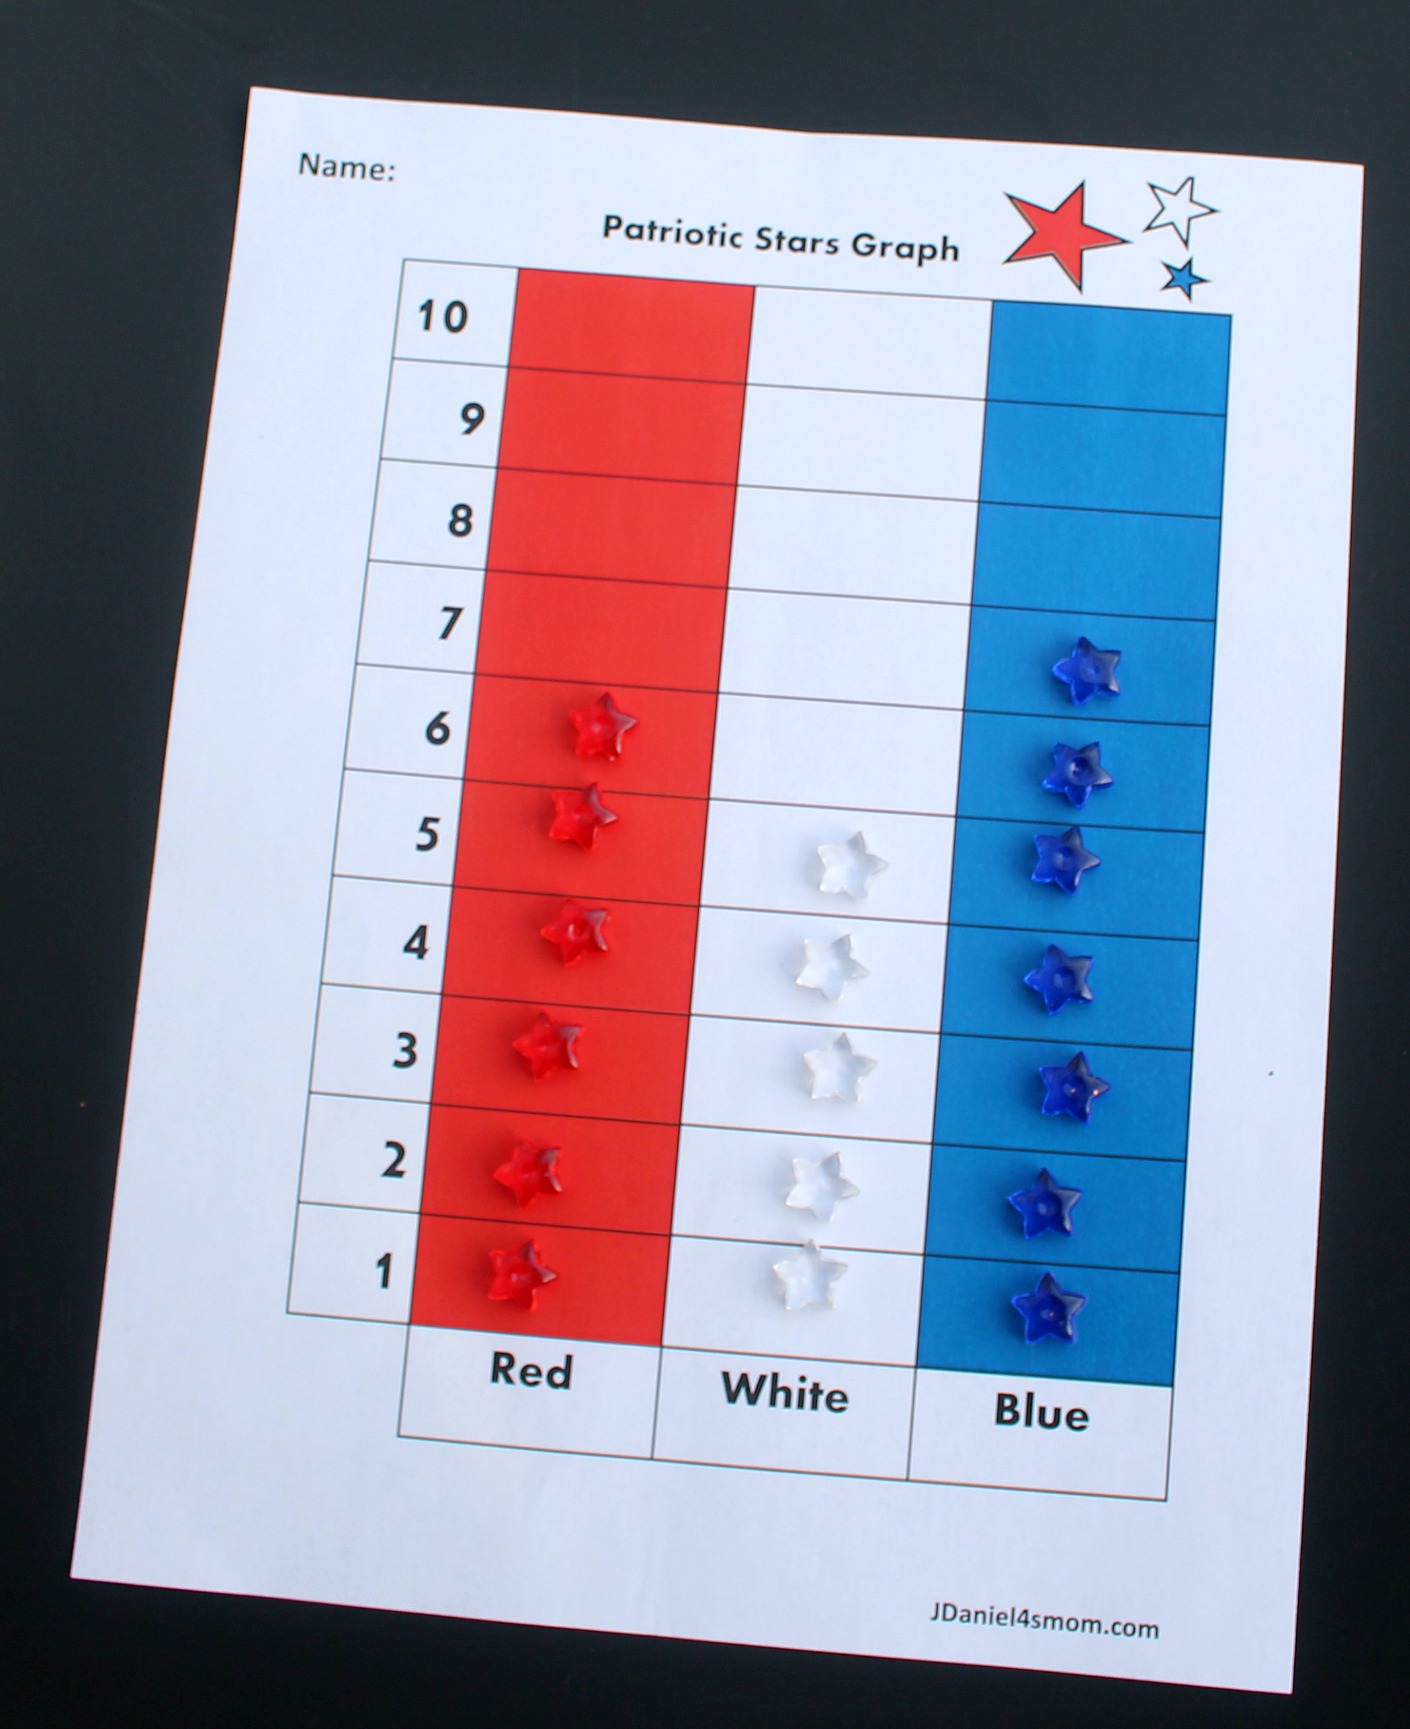 Patriotic Homemade Slime and Graphing Activity - Graphing the Stars